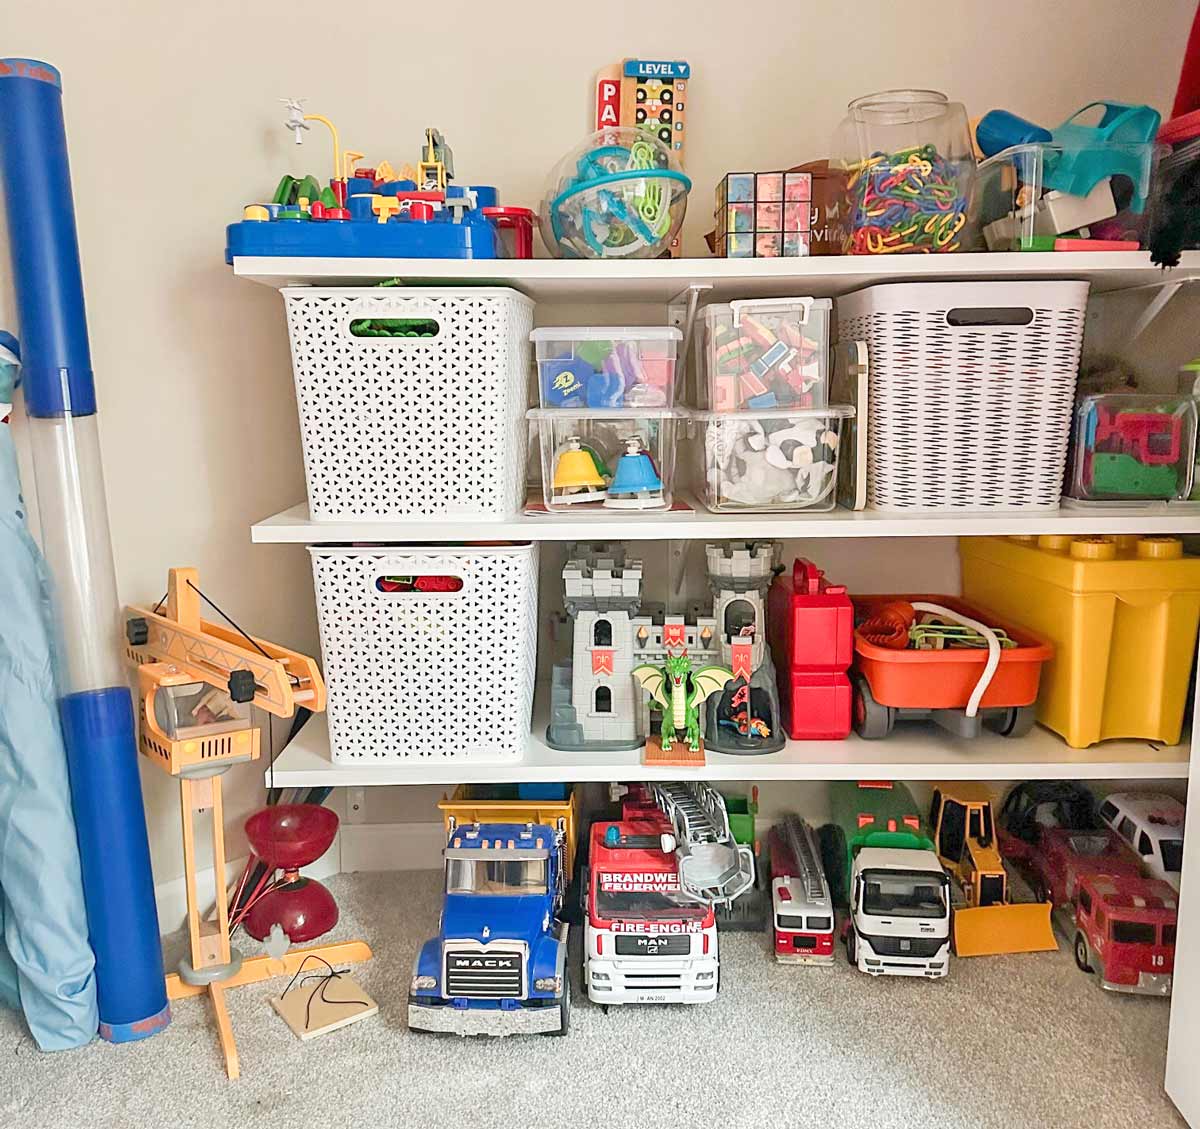 Image shows a child's closet full of organized toys in bins and clear boxes.